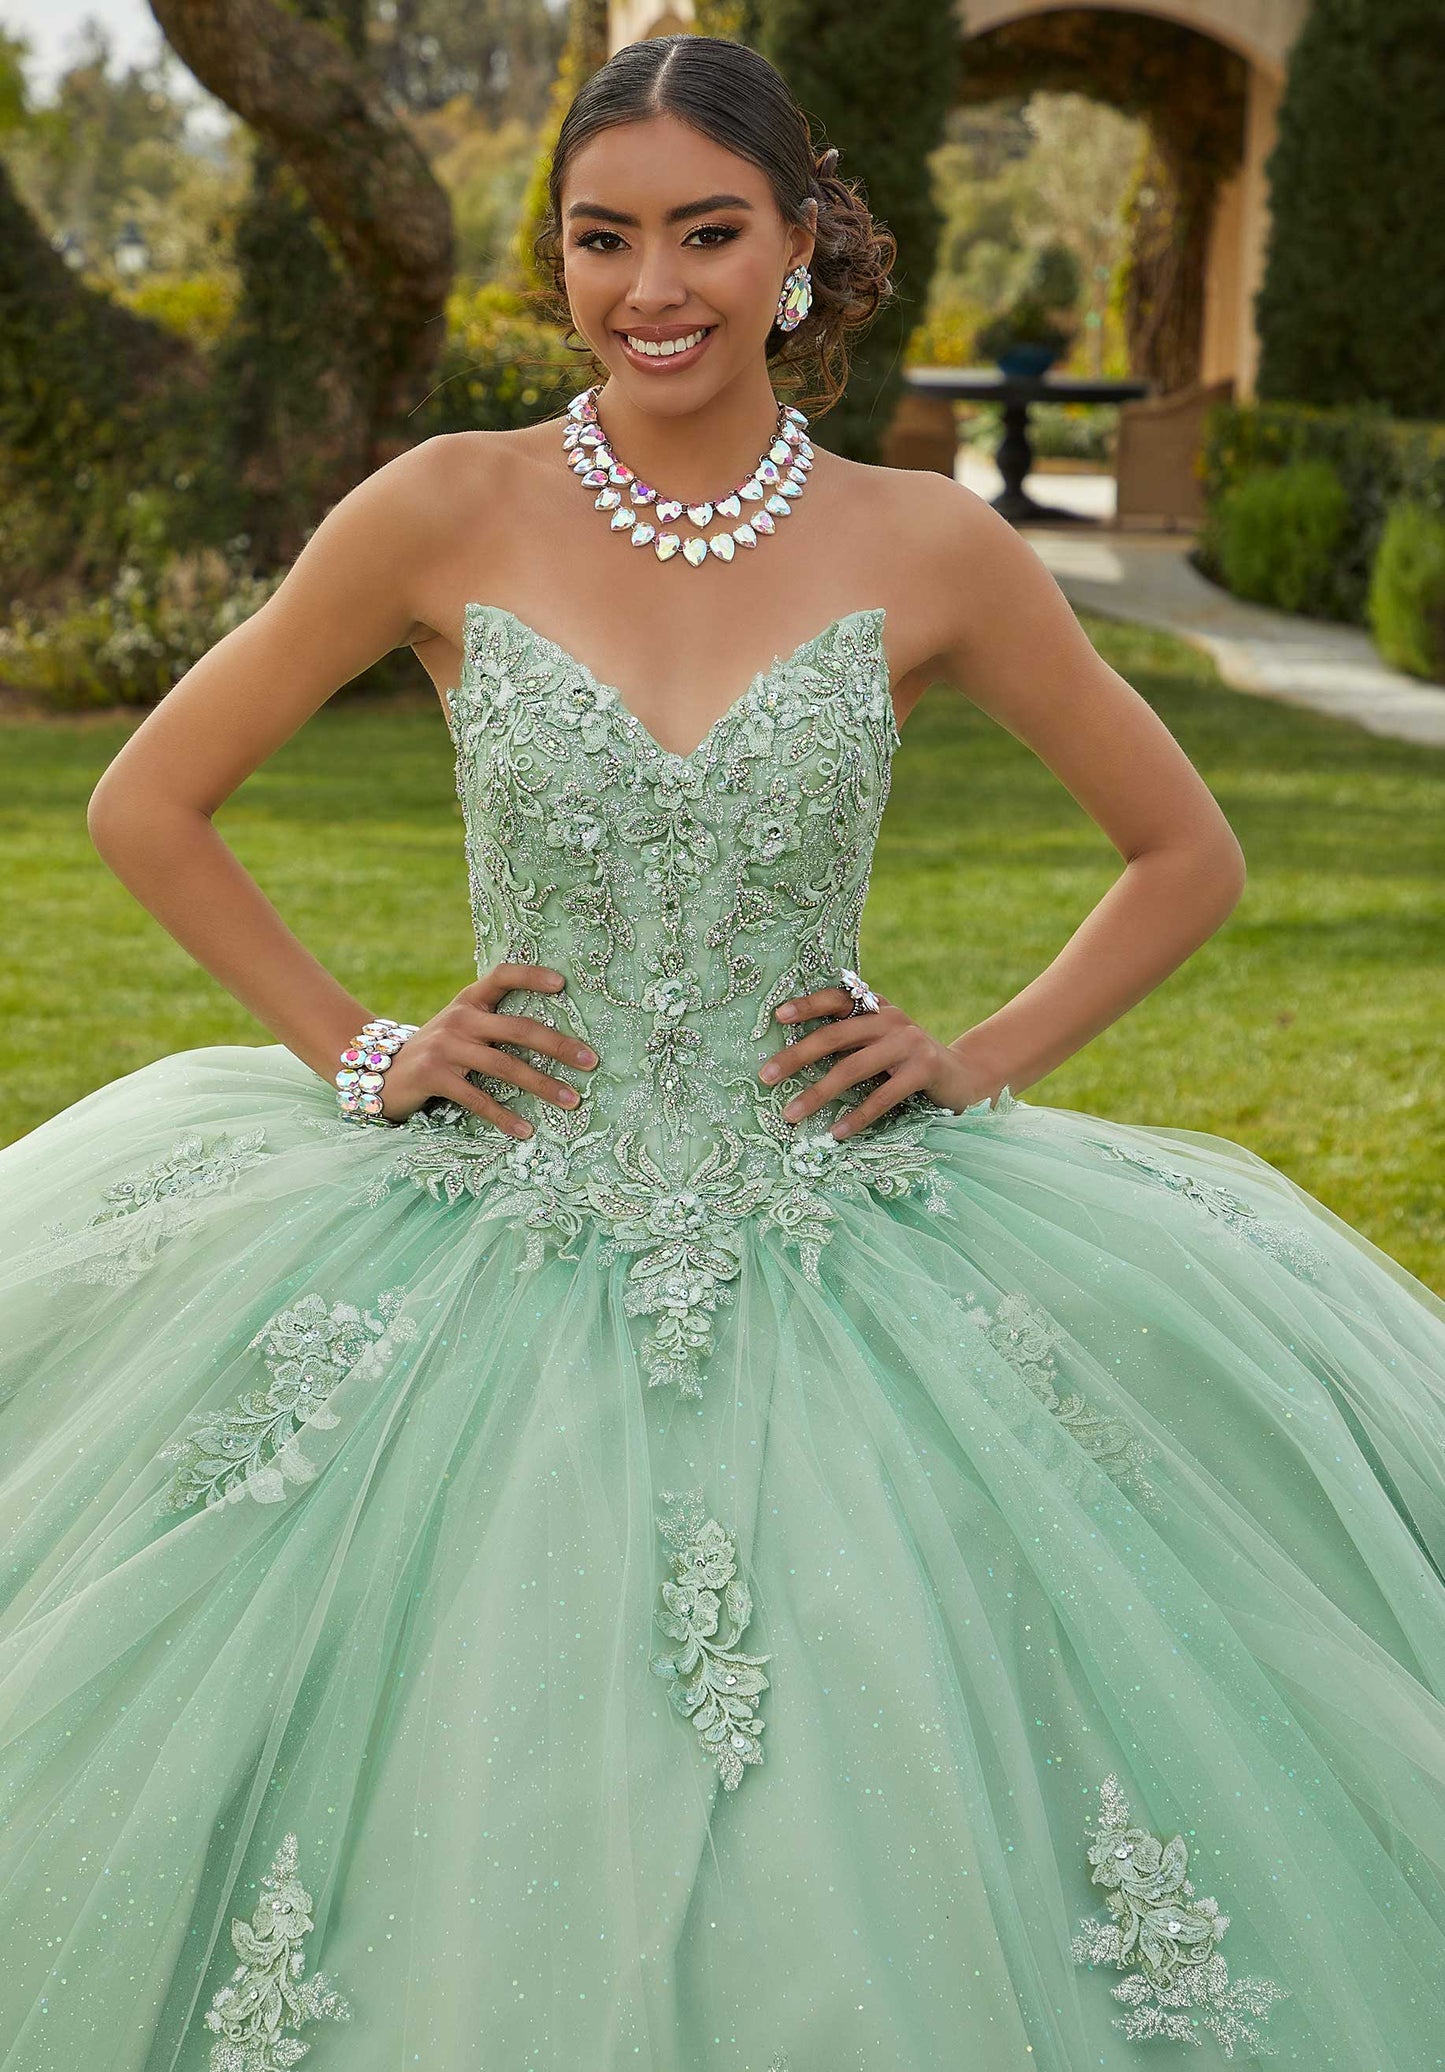 11732 | Rhinestone and Crystal Beaded Glitter Lace Quinceanera Dress